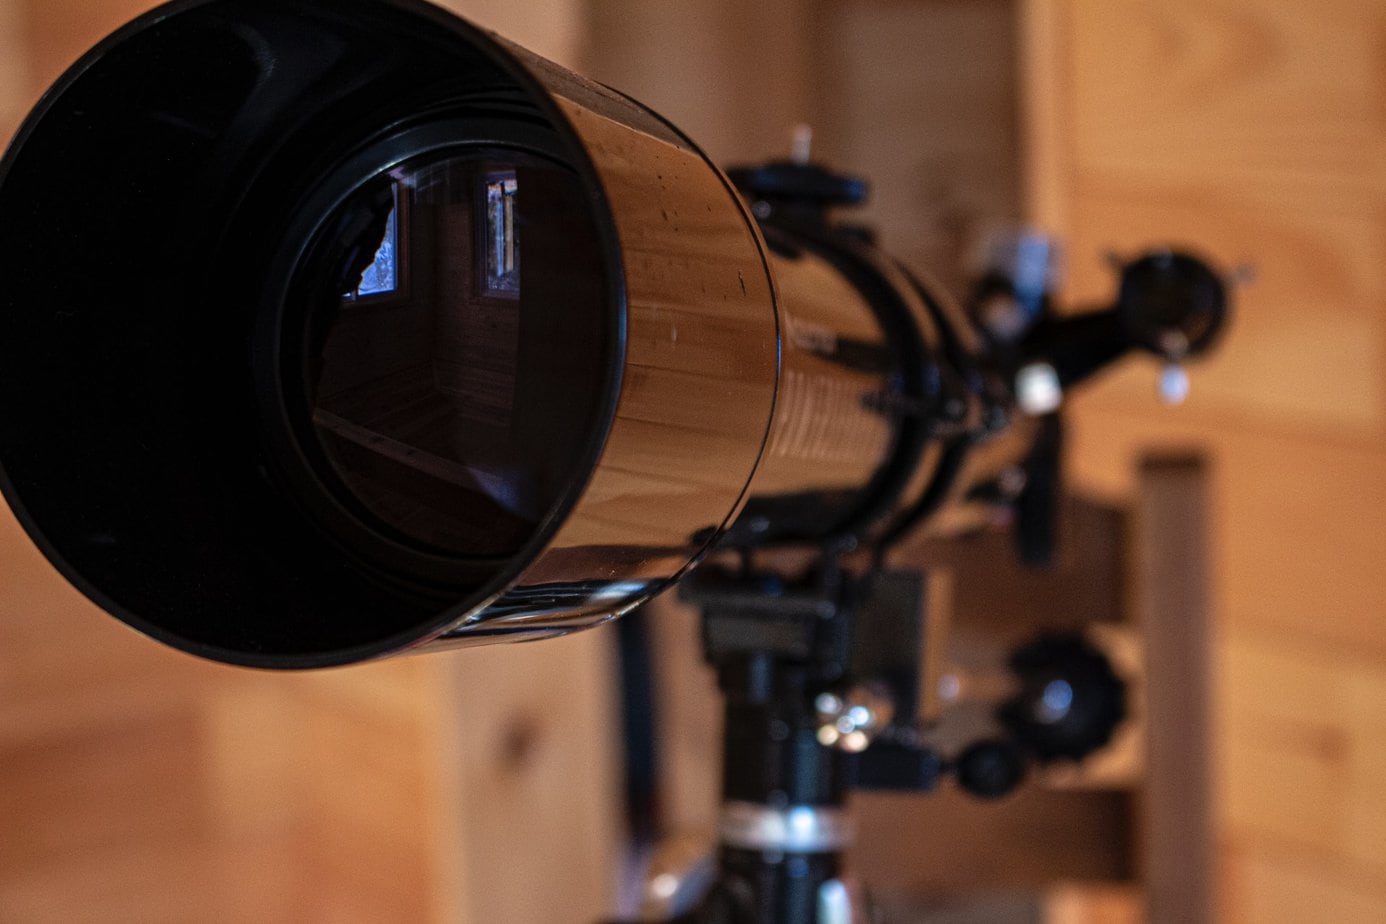 The Baader Solar Filter: How to Choose the Right One for Your Telescope